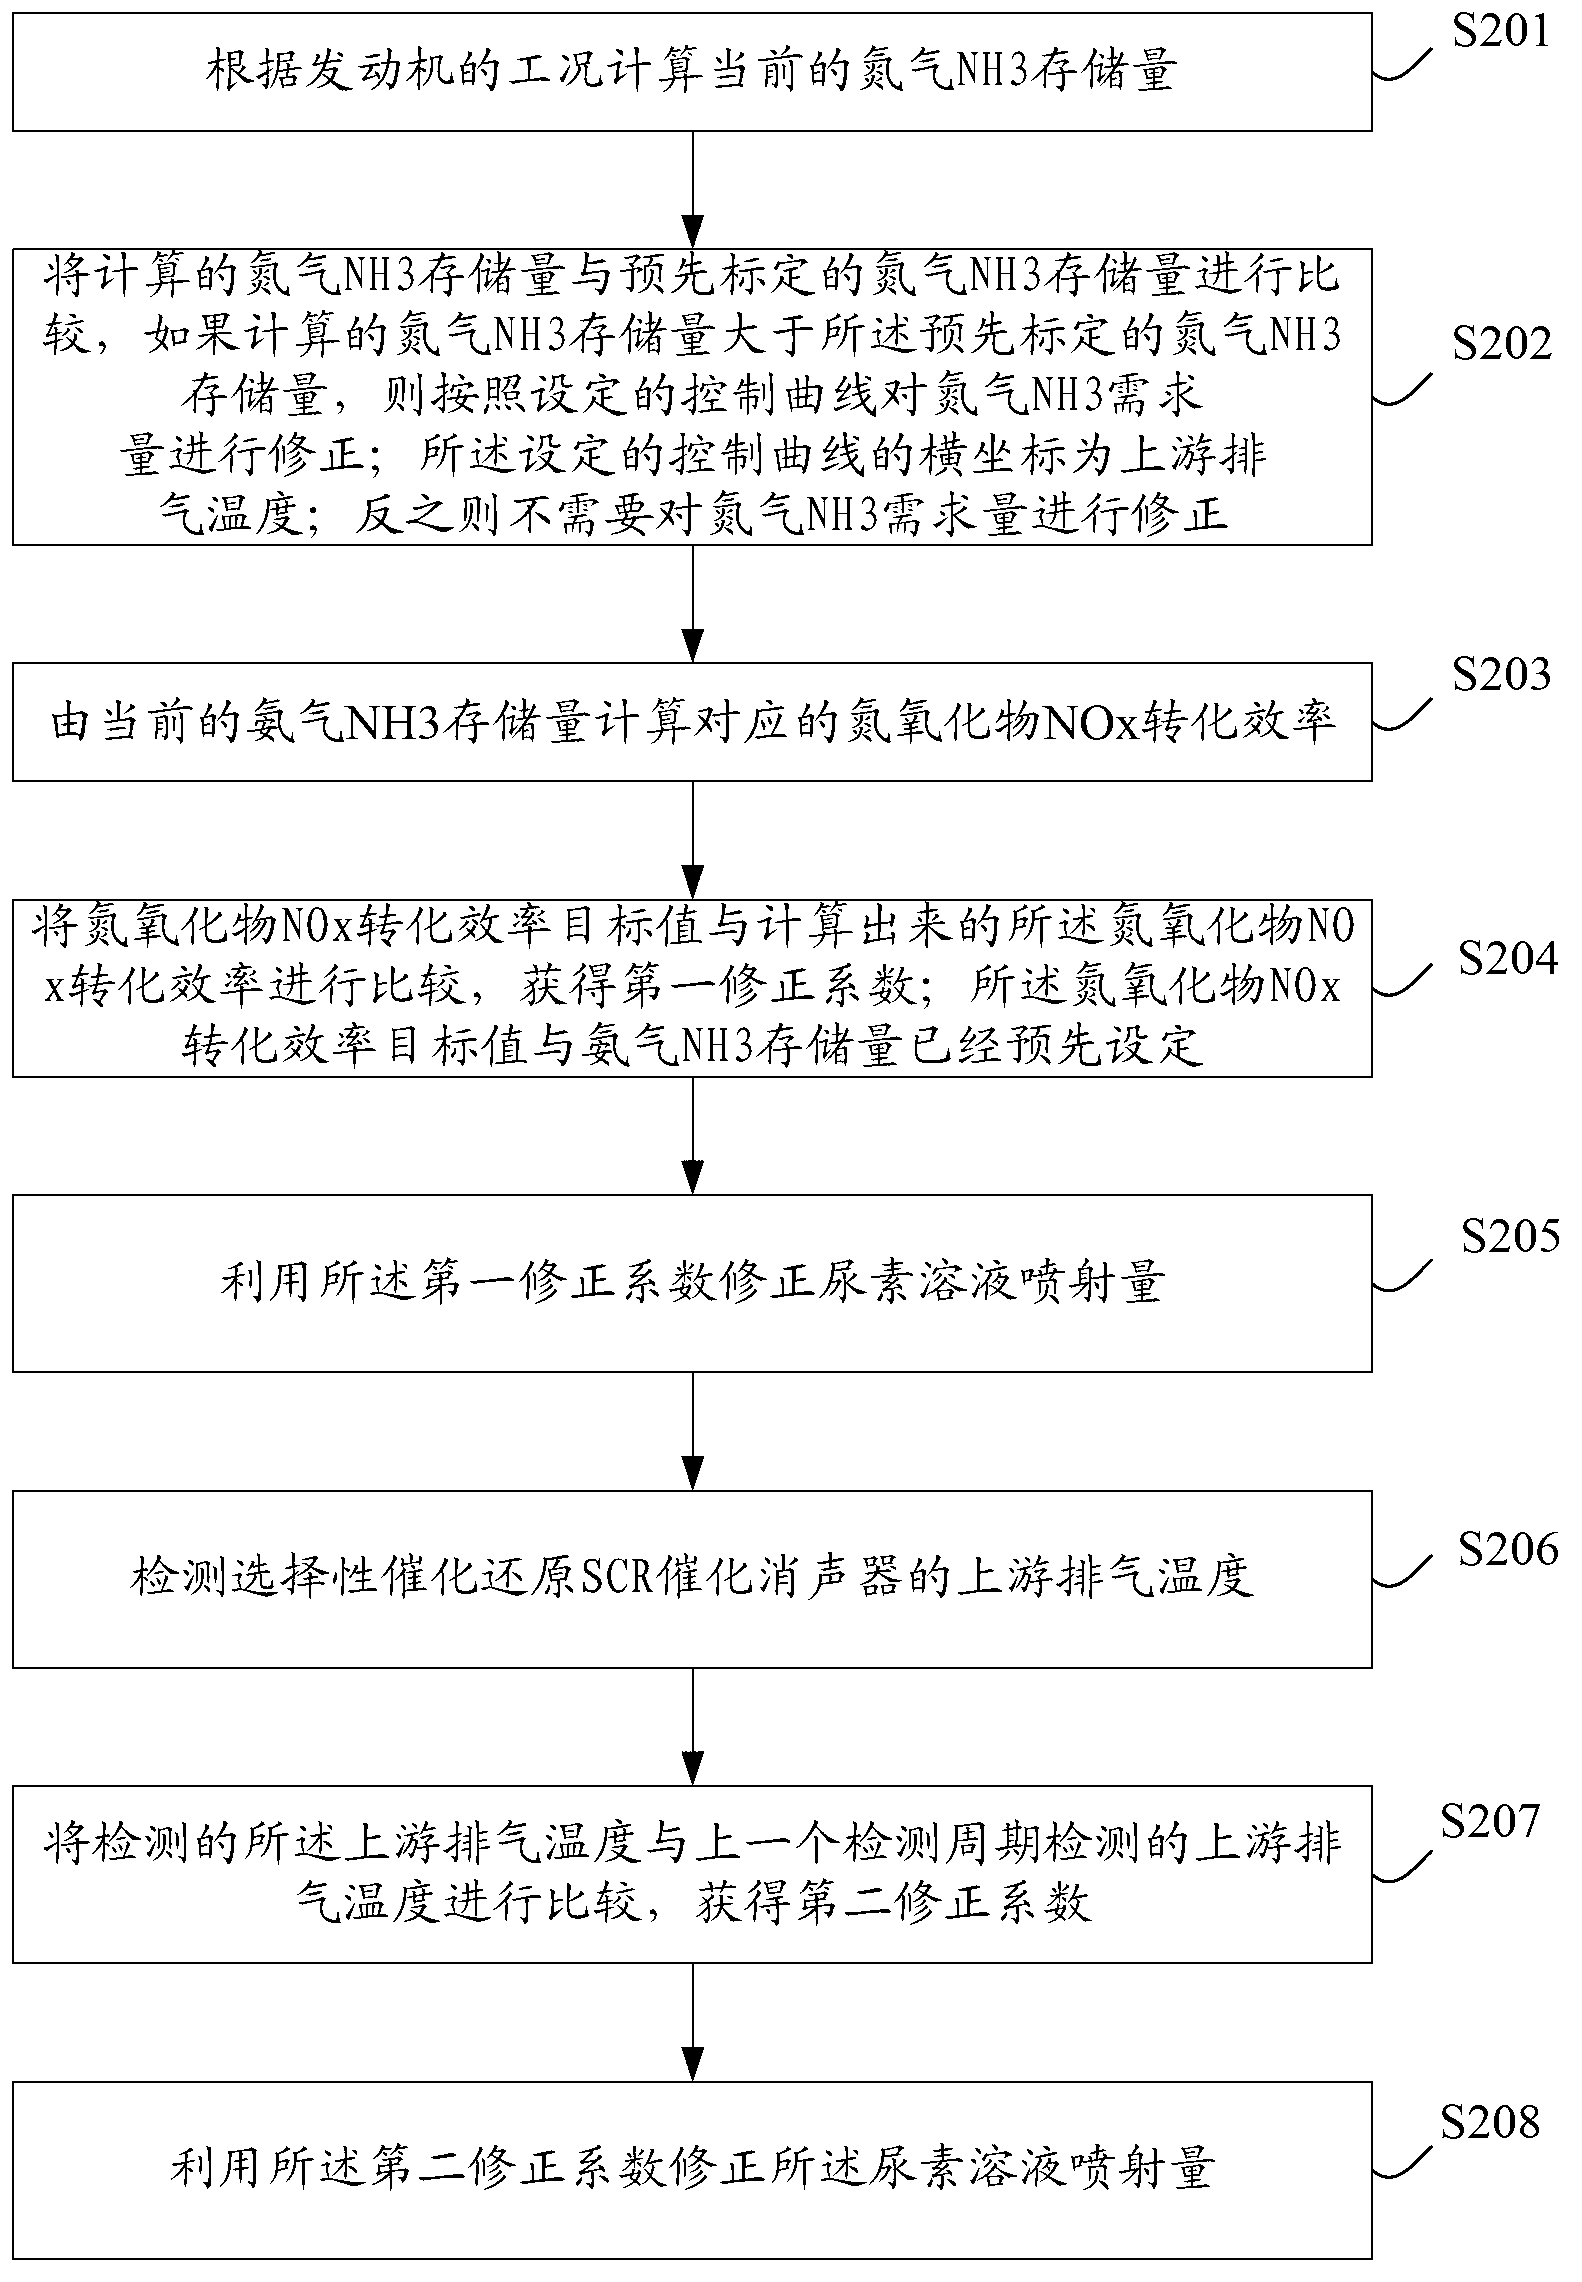 Method and system for controlling emitted dose of urea solution by SCR (Selective Catalytic reduction)